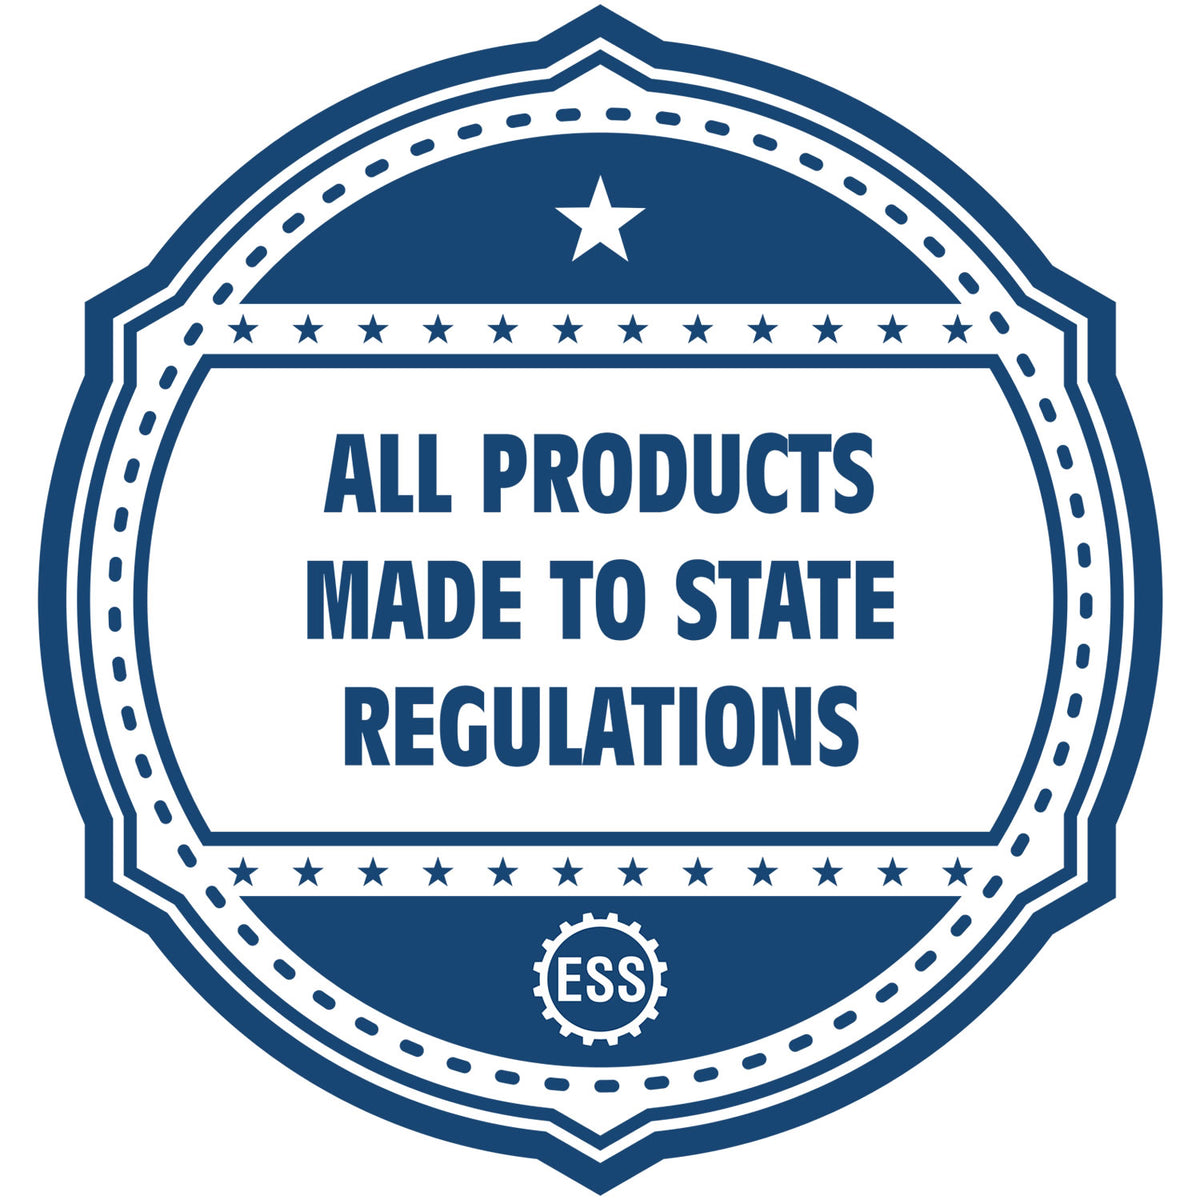 An icon or badge element for the Maine Landscape Architectural Seal Stamp showing that this product is made in compliance with state regulations.